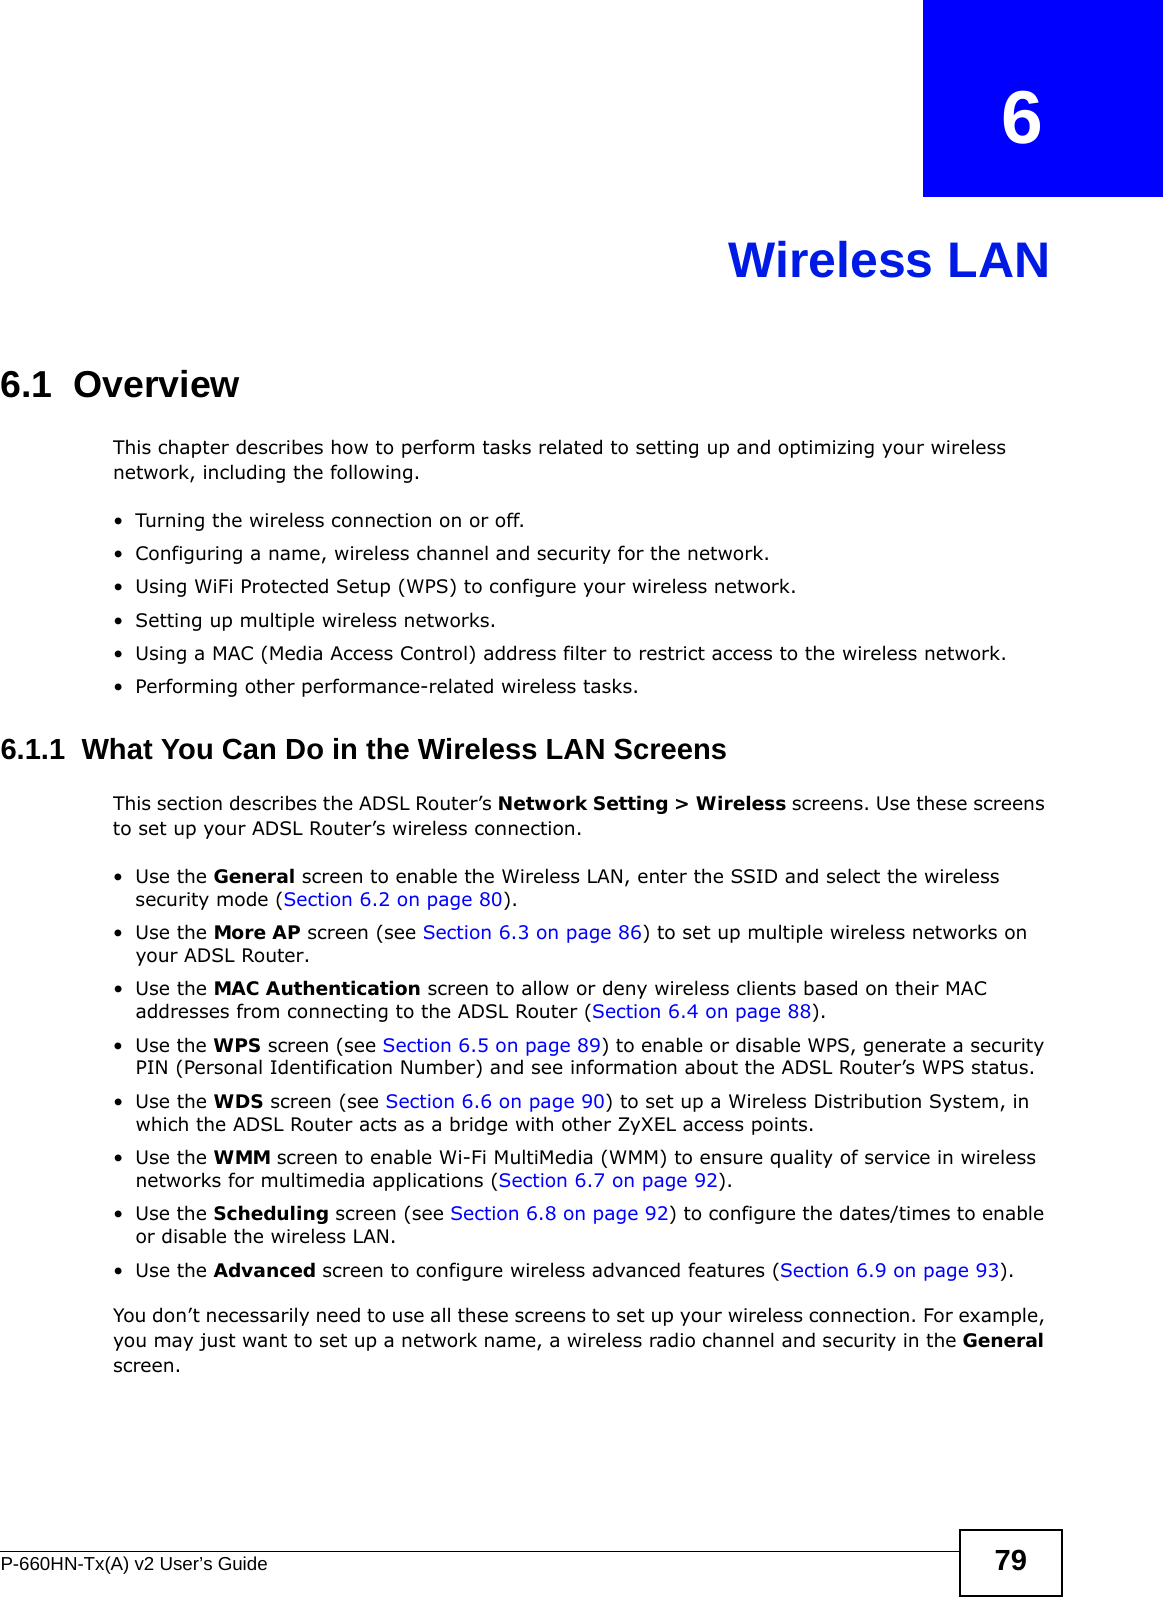 P-660HN-Tx(A) v2 User’s Guide 79CHAPTER   6Wireless LAN6.1  Overview This chapter describes how to perform tasks related to setting up and optimizing your wireless network, including the following.• Turning the wireless connection on or off.• Configuring a name, wireless channel and security for the network.• Using WiFi Protected Setup (WPS) to configure your wireless network.• Setting up multiple wireless networks.• Using a MAC (Media Access Control) address filter to restrict access to the wireless network.• Performing other performance-related wireless tasks.6.1.1  What You Can Do in the Wireless LAN ScreensThis section describes the ADSL Router’s Network Setting &gt; Wireless screens. Use these screens to set up your ADSL Router’s wireless connection.•Use the General screen to enable the Wireless LAN, enter the SSID and select the wireless security mode (Section 6.2 on page 80).•Use the More AP screen (see Section 6.3 on page 86) to set up multiple wireless networks on your ADSL Router.•Use the MAC Authentication screen to allow or deny wireless clients based on their MAC addresses from connecting to the ADSL Router (Section 6.4 on page 88).•Use the WPS screen (see Section 6.5 on page 89) to enable or disable WPS, generate a security PIN (Personal Identification Number) and see information about the ADSL Router’s WPS status.•Use the WDS screen (see Section 6.6 on page 90) to set up a Wireless Distribution System, in which the ADSL Router acts as a bridge with other ZyXEL access points.•Use the WMM screen to enable Wi-Fi MultiMedia (WMM) to ensure quality of service in wireless networks for multimedia applications (Section 6.7 on page 92). •Use the Scheduling screen (see Section 6.8 on page 92) to configure the dates/times to enable or disable the wireless LAN.•Use the Advanced screen to configure wireless advanced features (Section 6.9 on page 93).You don’t necessarily need to use all these screens to set up your wireless connection. For example, you may just want to set up a network name, a wireless radio channel and security in the General screen.